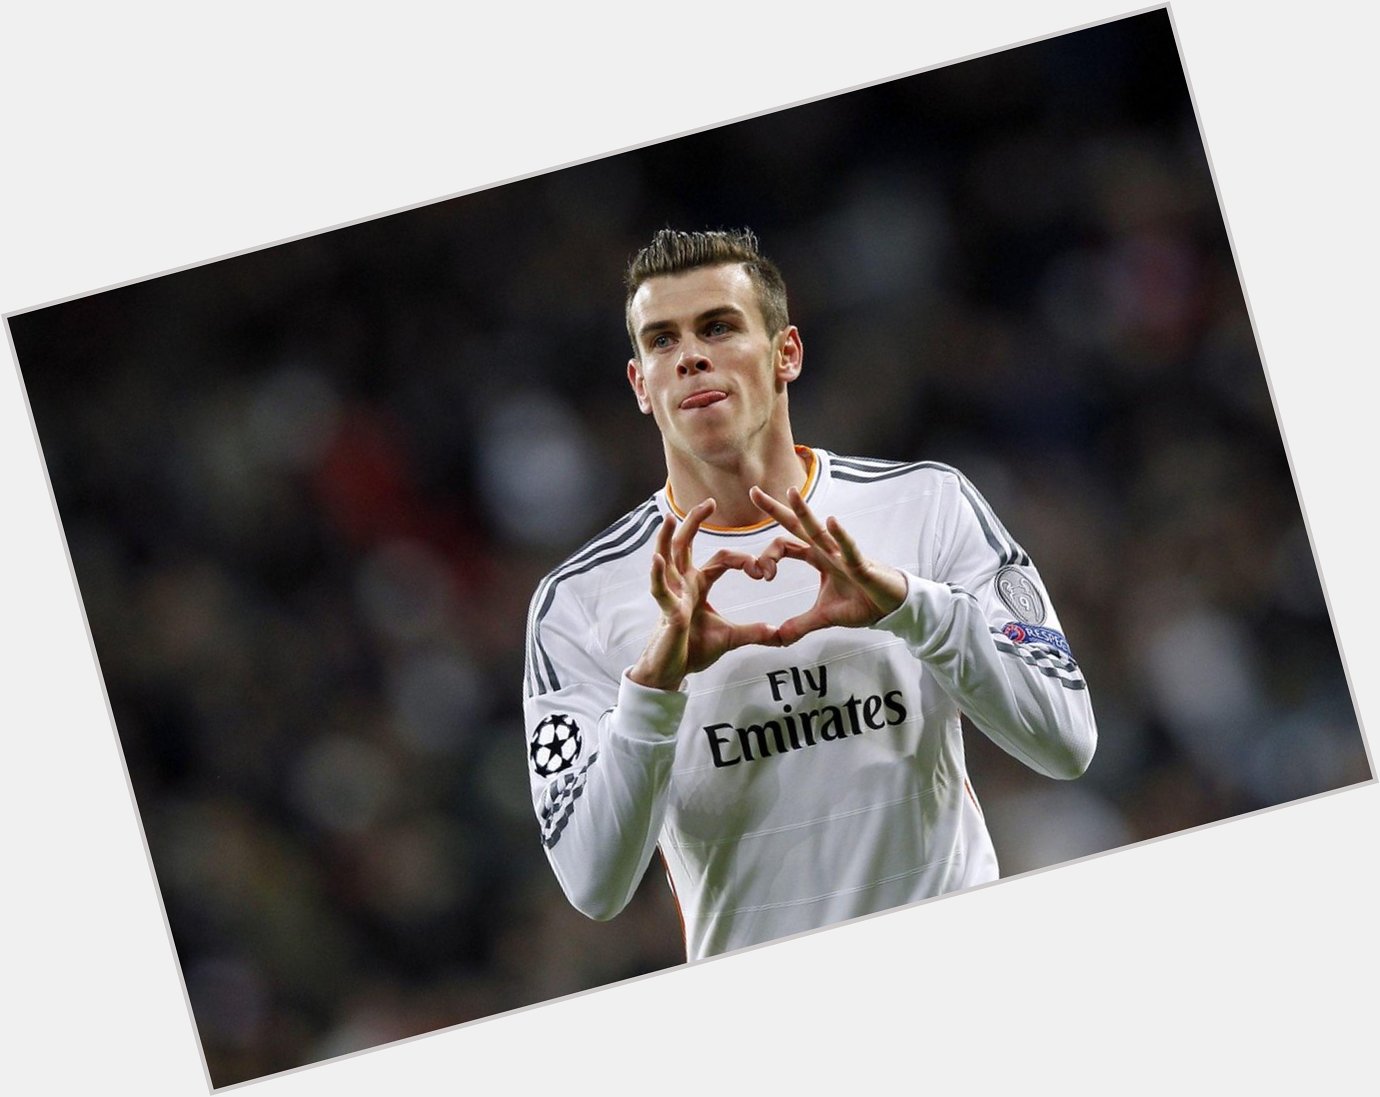 Happy birthday to star Gareth Bale, who turns 26 today! 